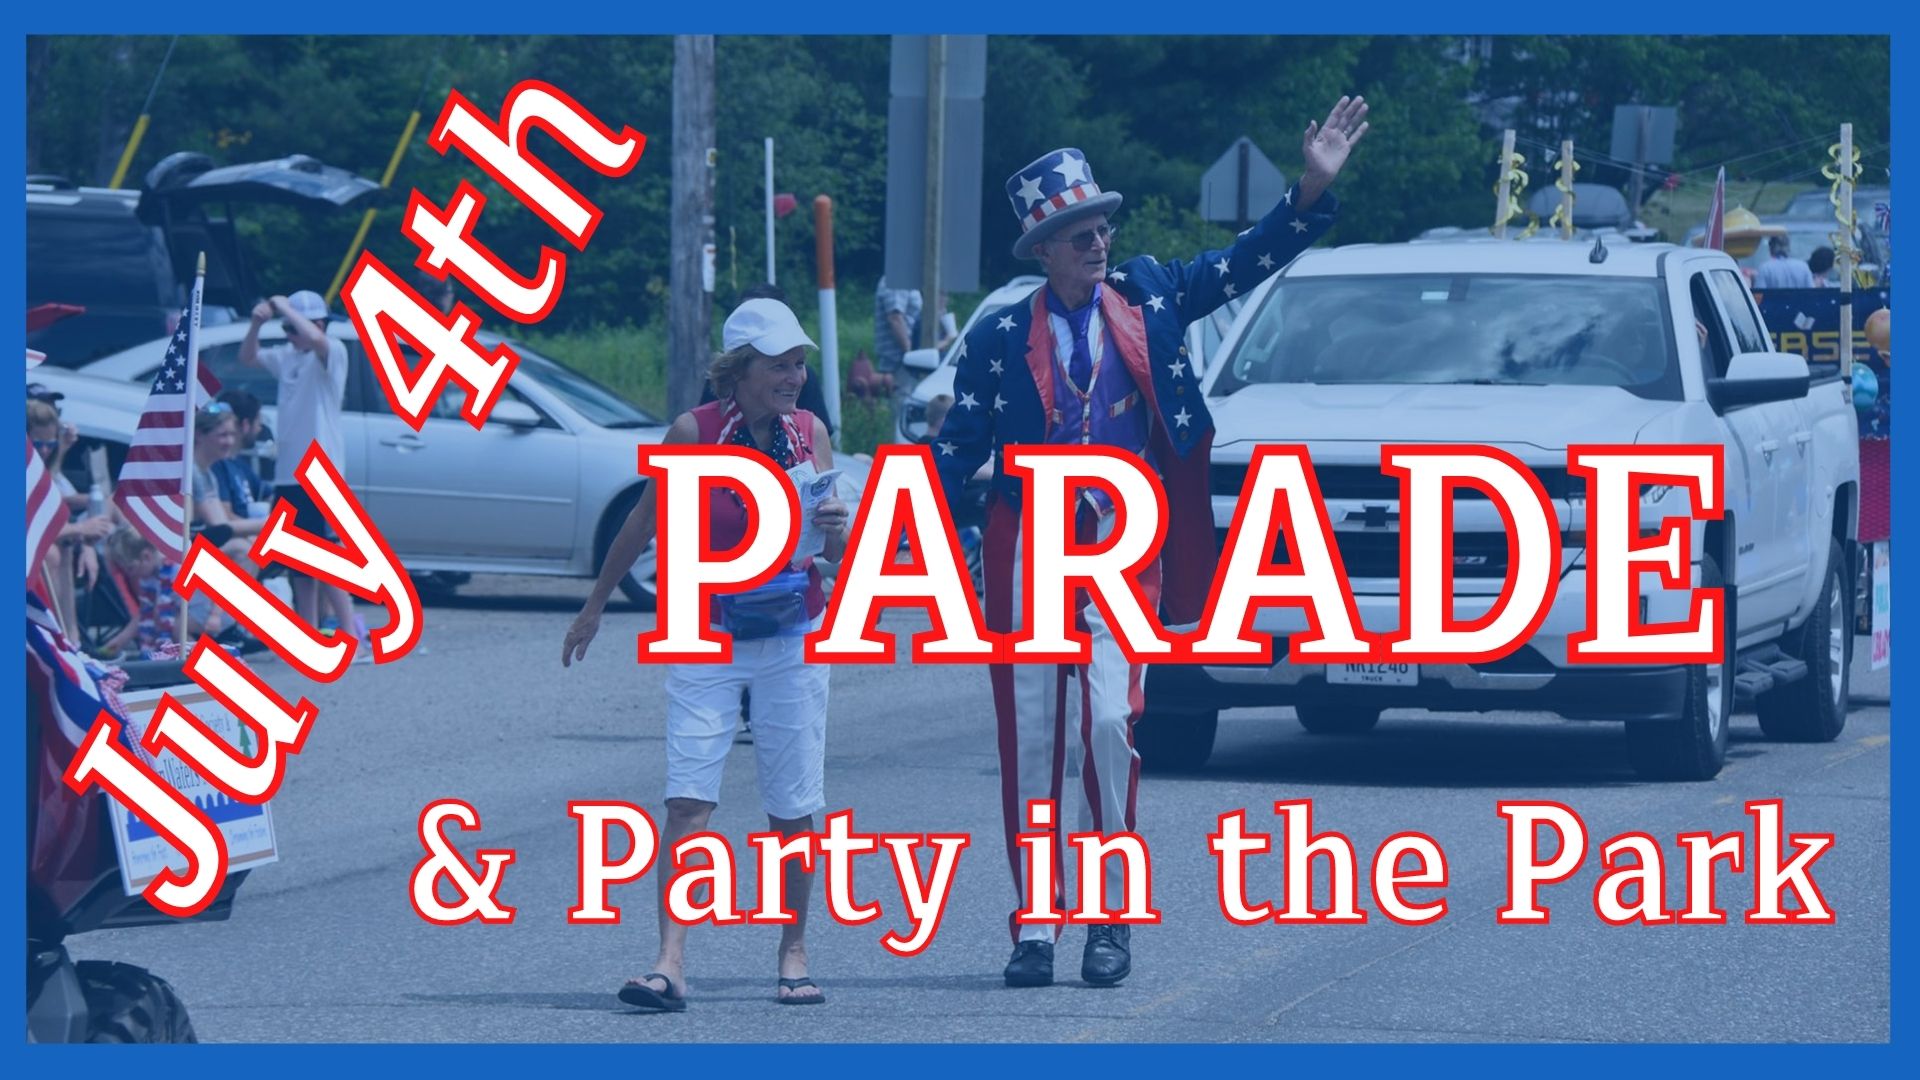 July 4th Parade & Party